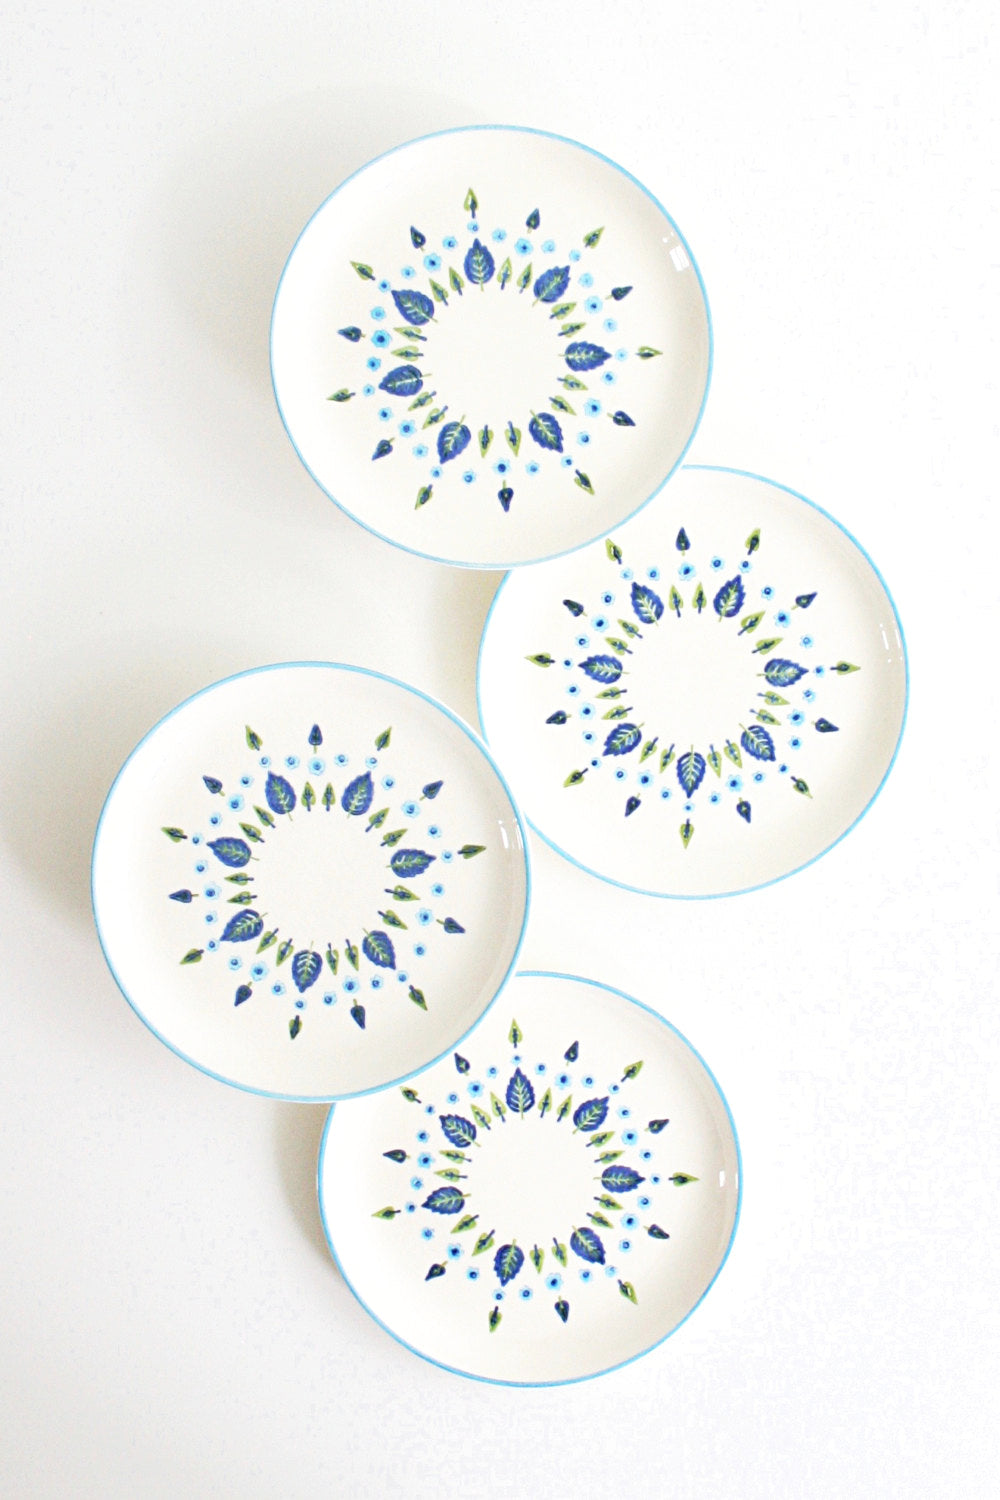 SOLD — Mid Century Swiss Alpine Bread & Butter Plates by Marcrest